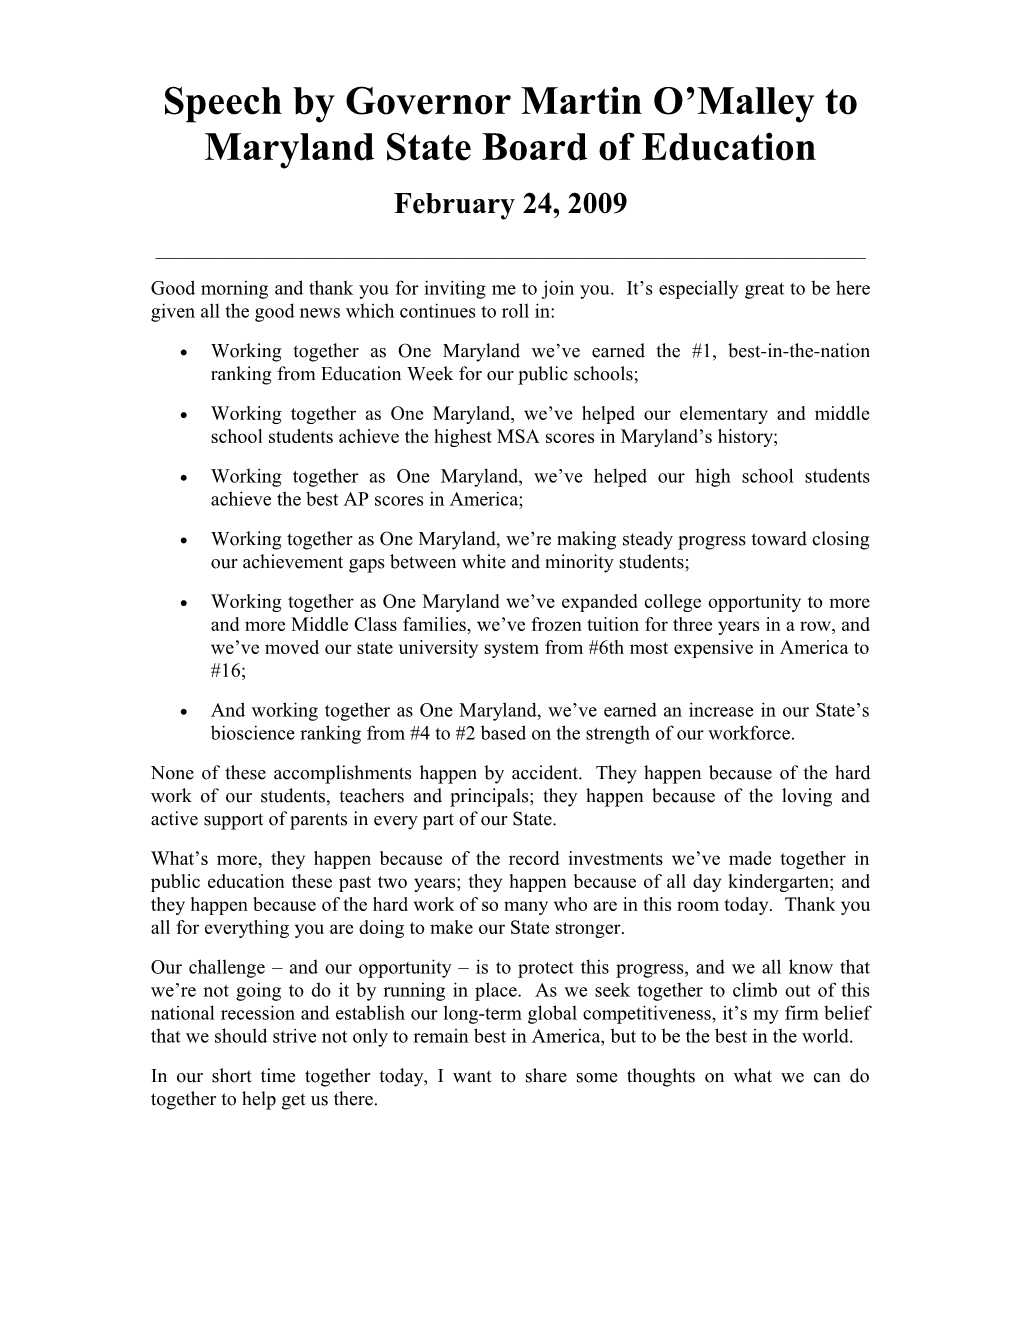 Speech by Governor Martin O Malley to Maryland State Board of Education